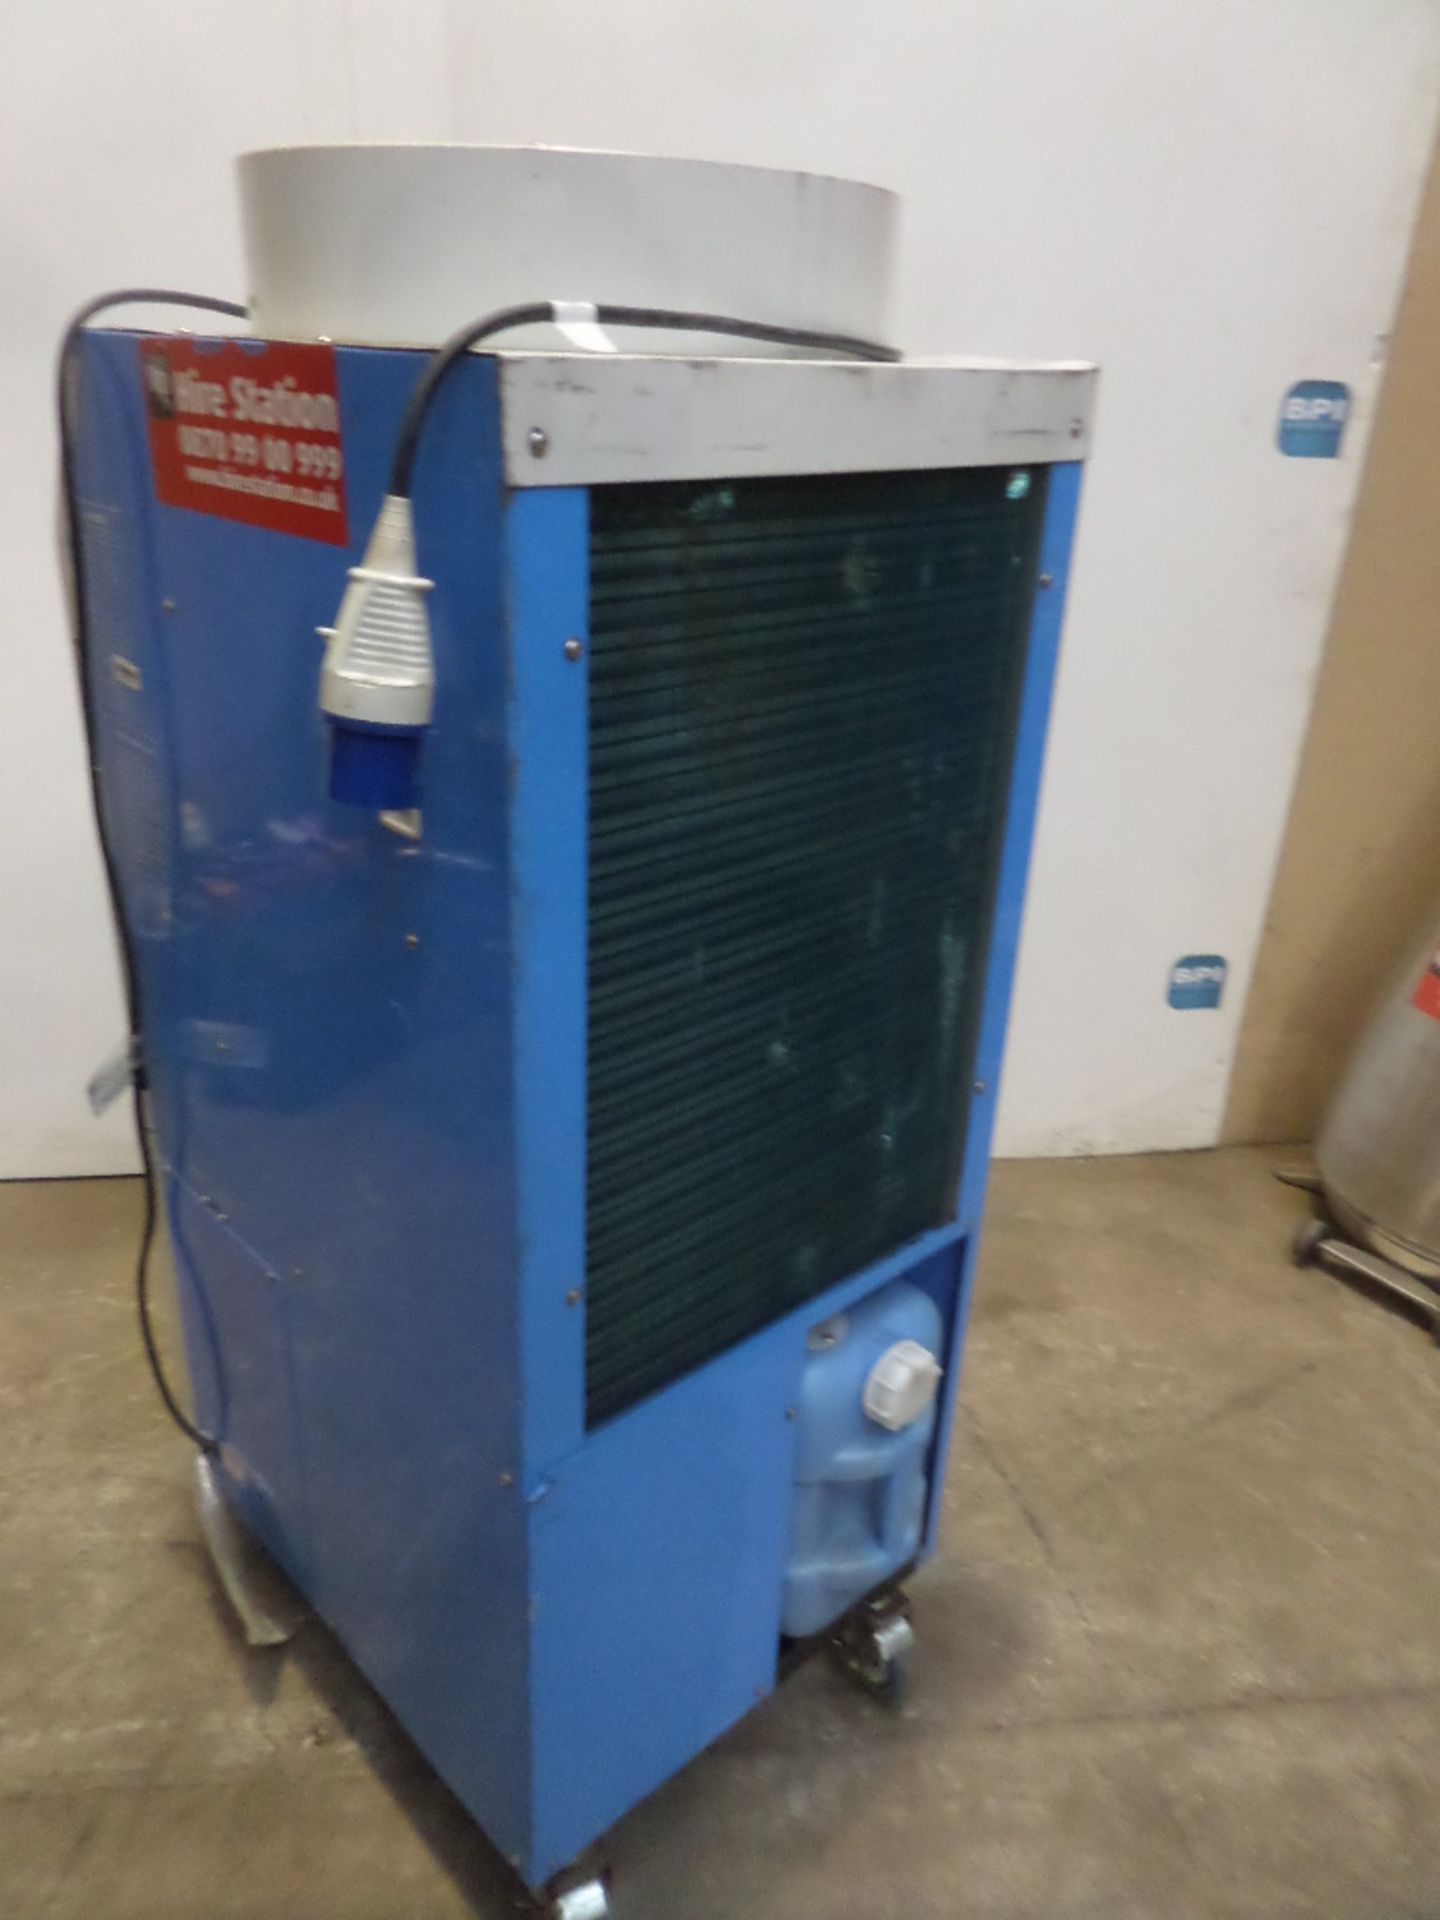 AIRREX HSC-2500 {026649} 21000BTU MOBILE AIR CONDITIONER 240v 16amp connection - power there and see - Image 3 of 3